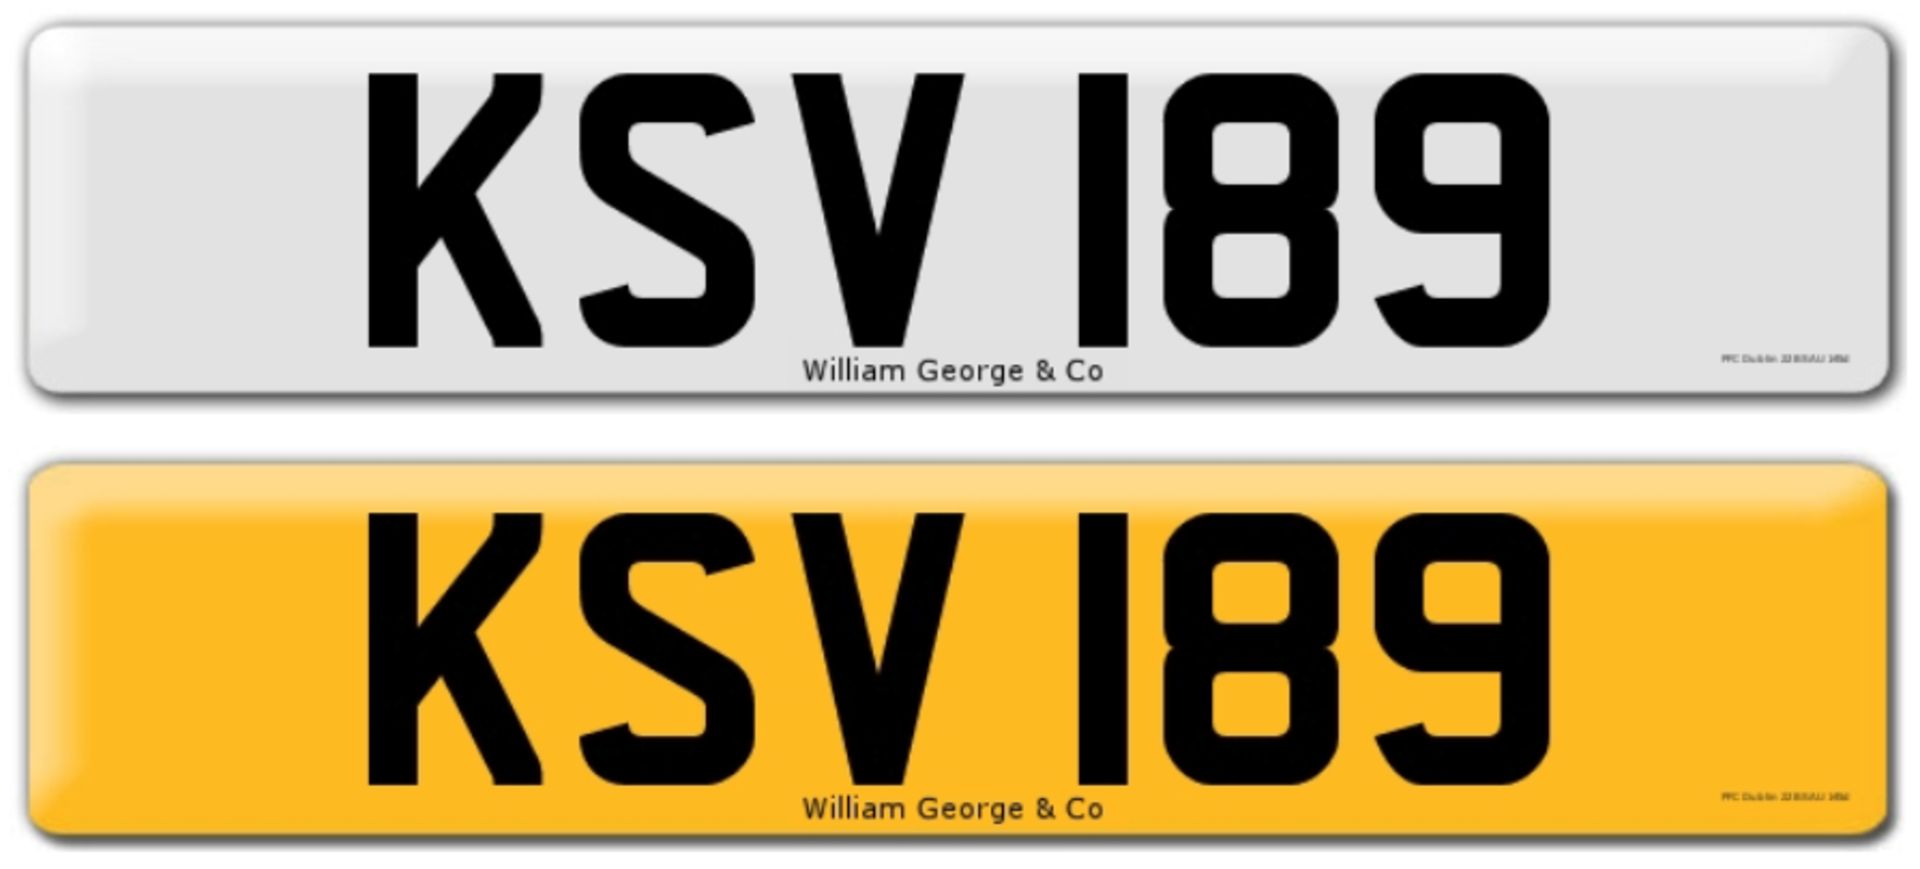 Registration on DVLA retention certificate, ready to transfer KSV 189 This number plate /